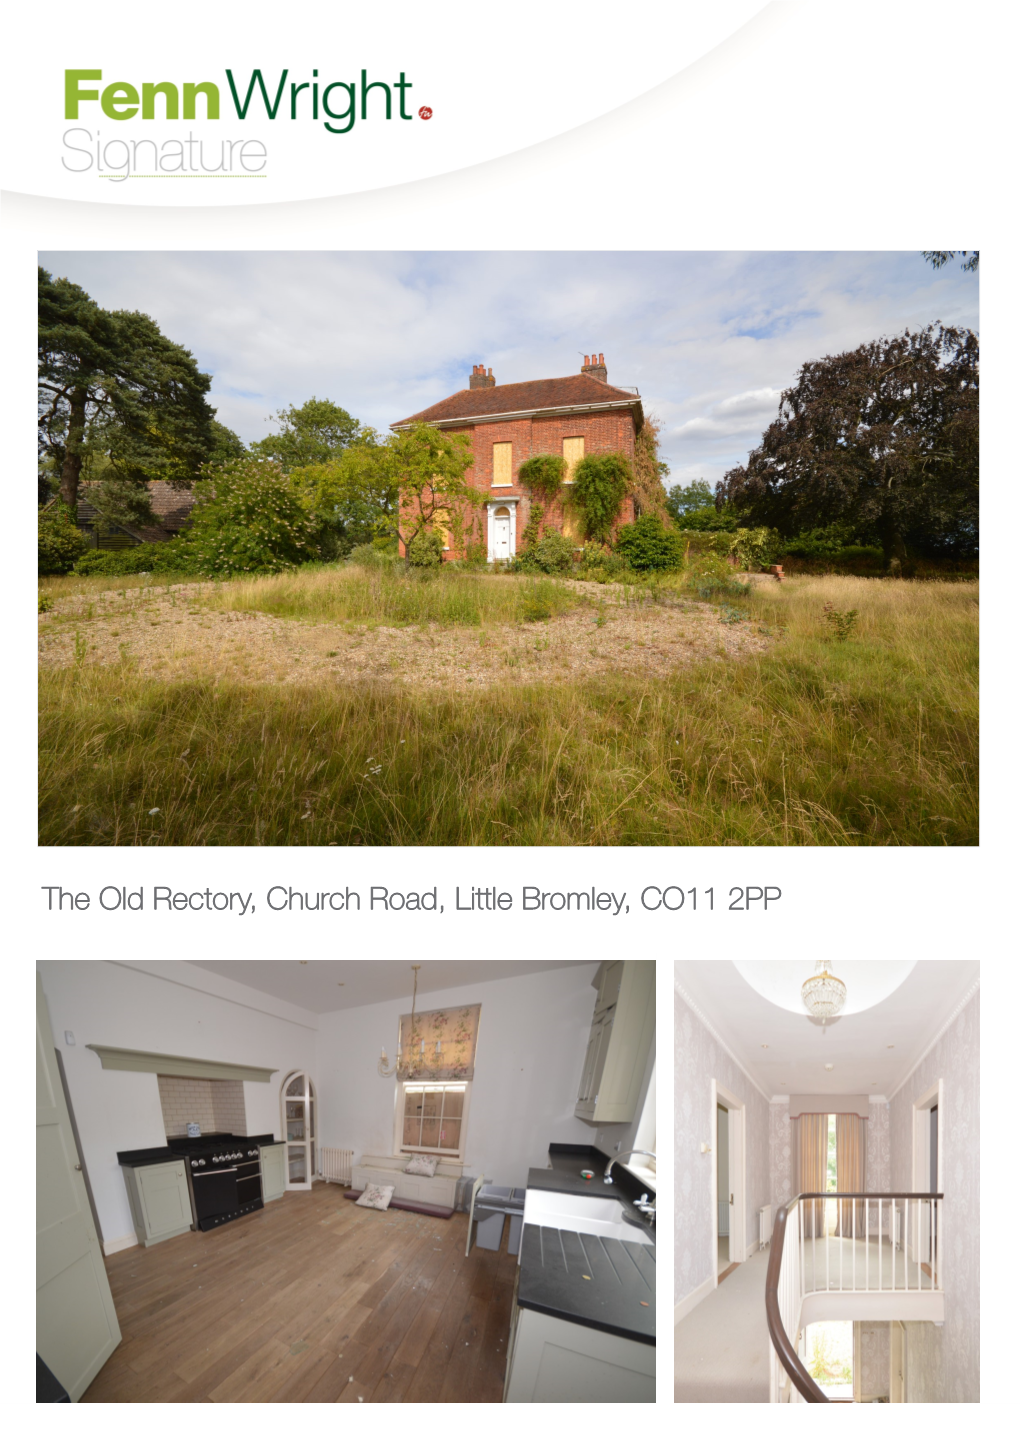 The Old Rectory, Church Road, Little Bromley, CO11 2PP